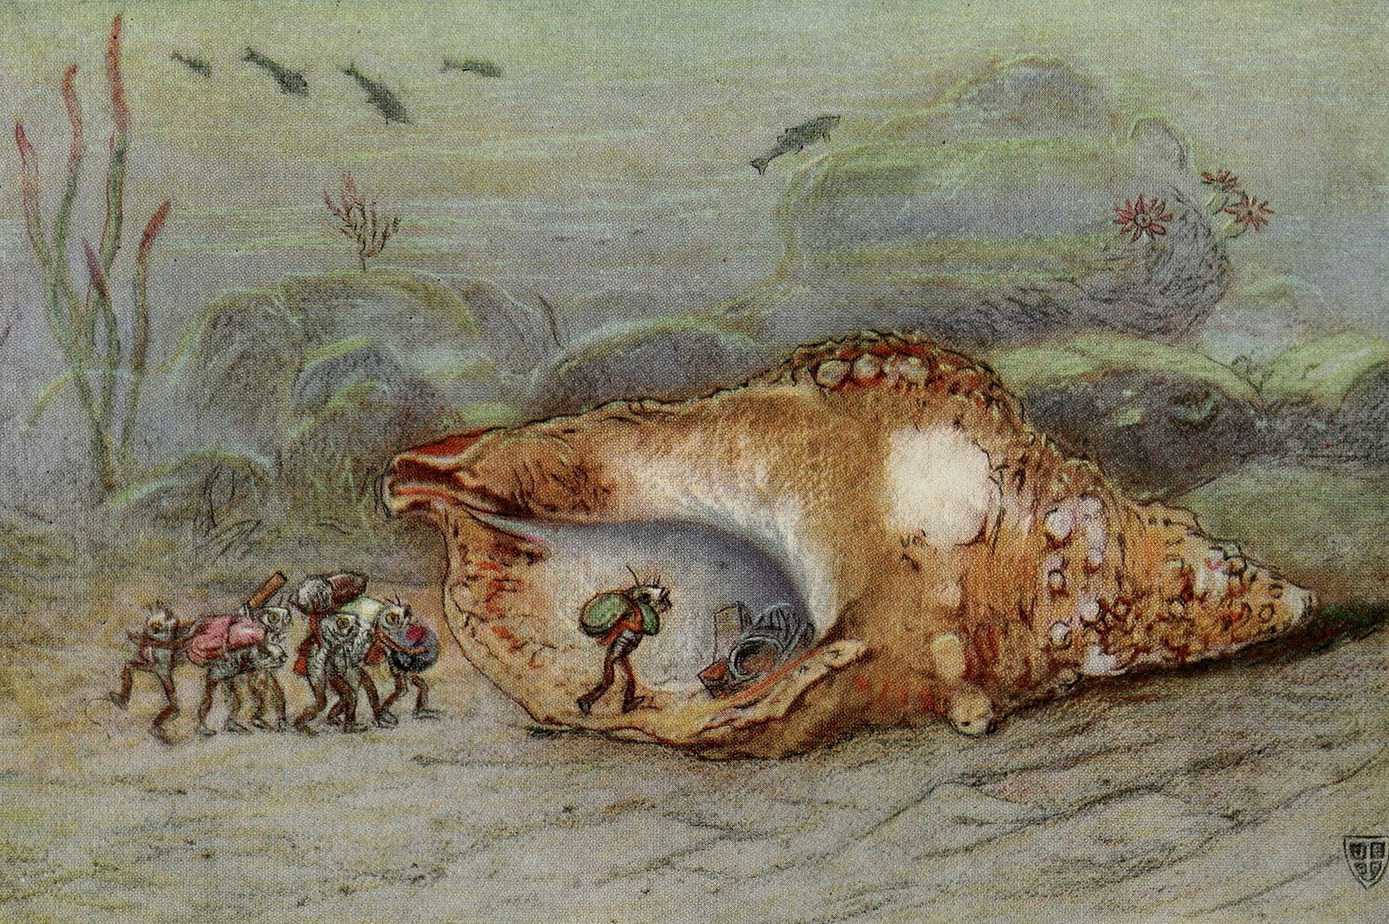 Seashells are beautiful, ornamental, intriguing artifacts and we have long been interested in them as a potentially magical item. This illustration is from The Great Sea Horse 1909 by Isabel Anderson.